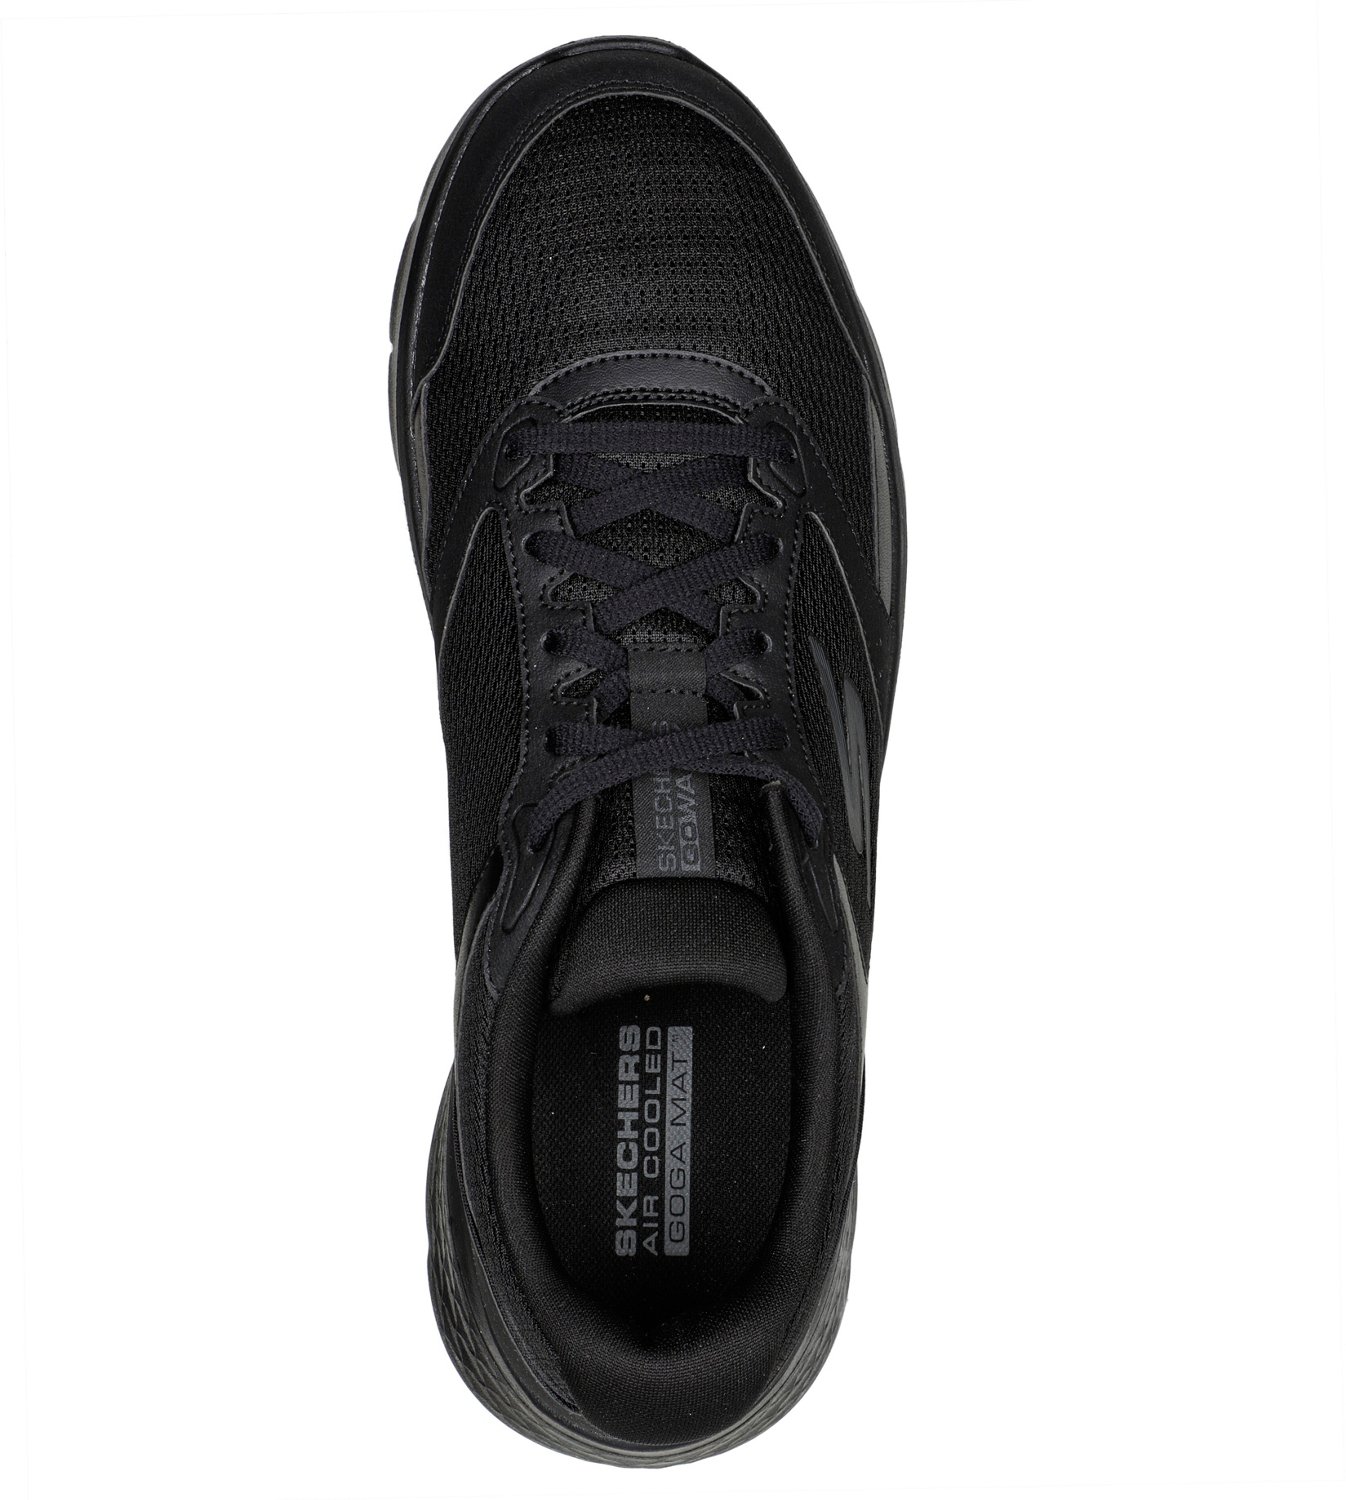 SKECHERS Men's Go Walk Flex Shoes | Free Shipping at Academy